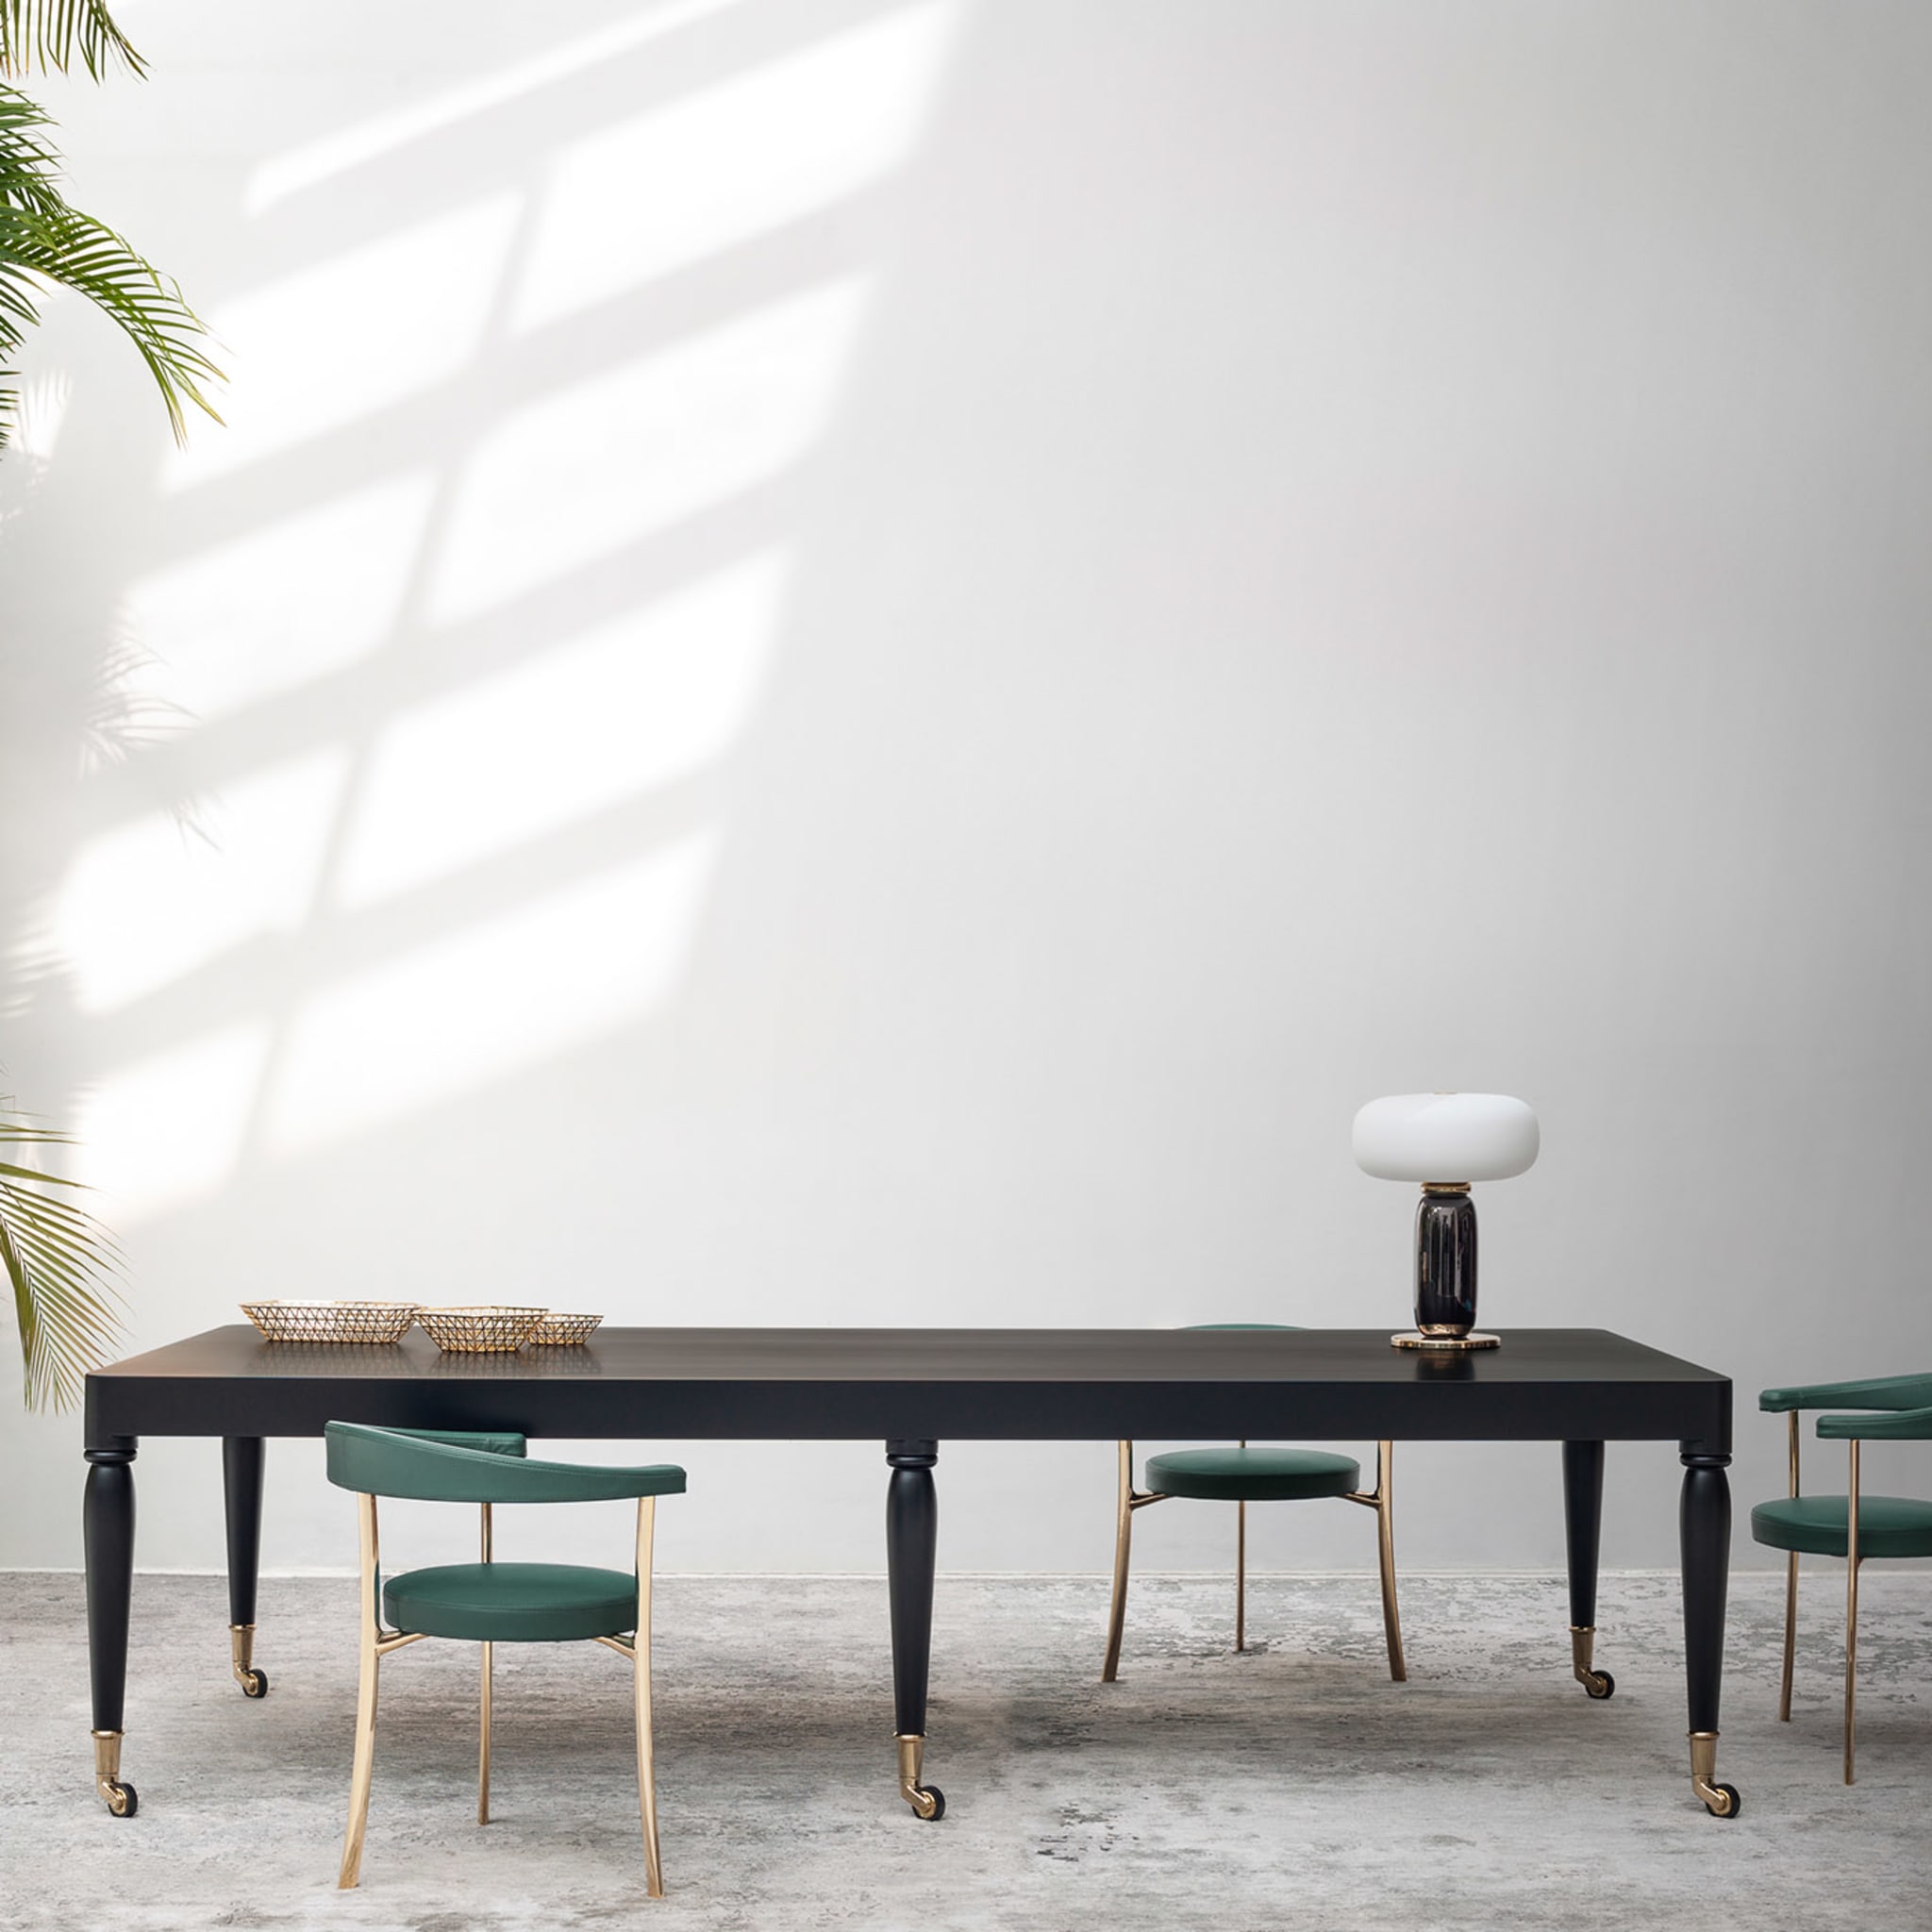 Shaker Black Dining Table by Stefano Giovannoni - Alternative view 1